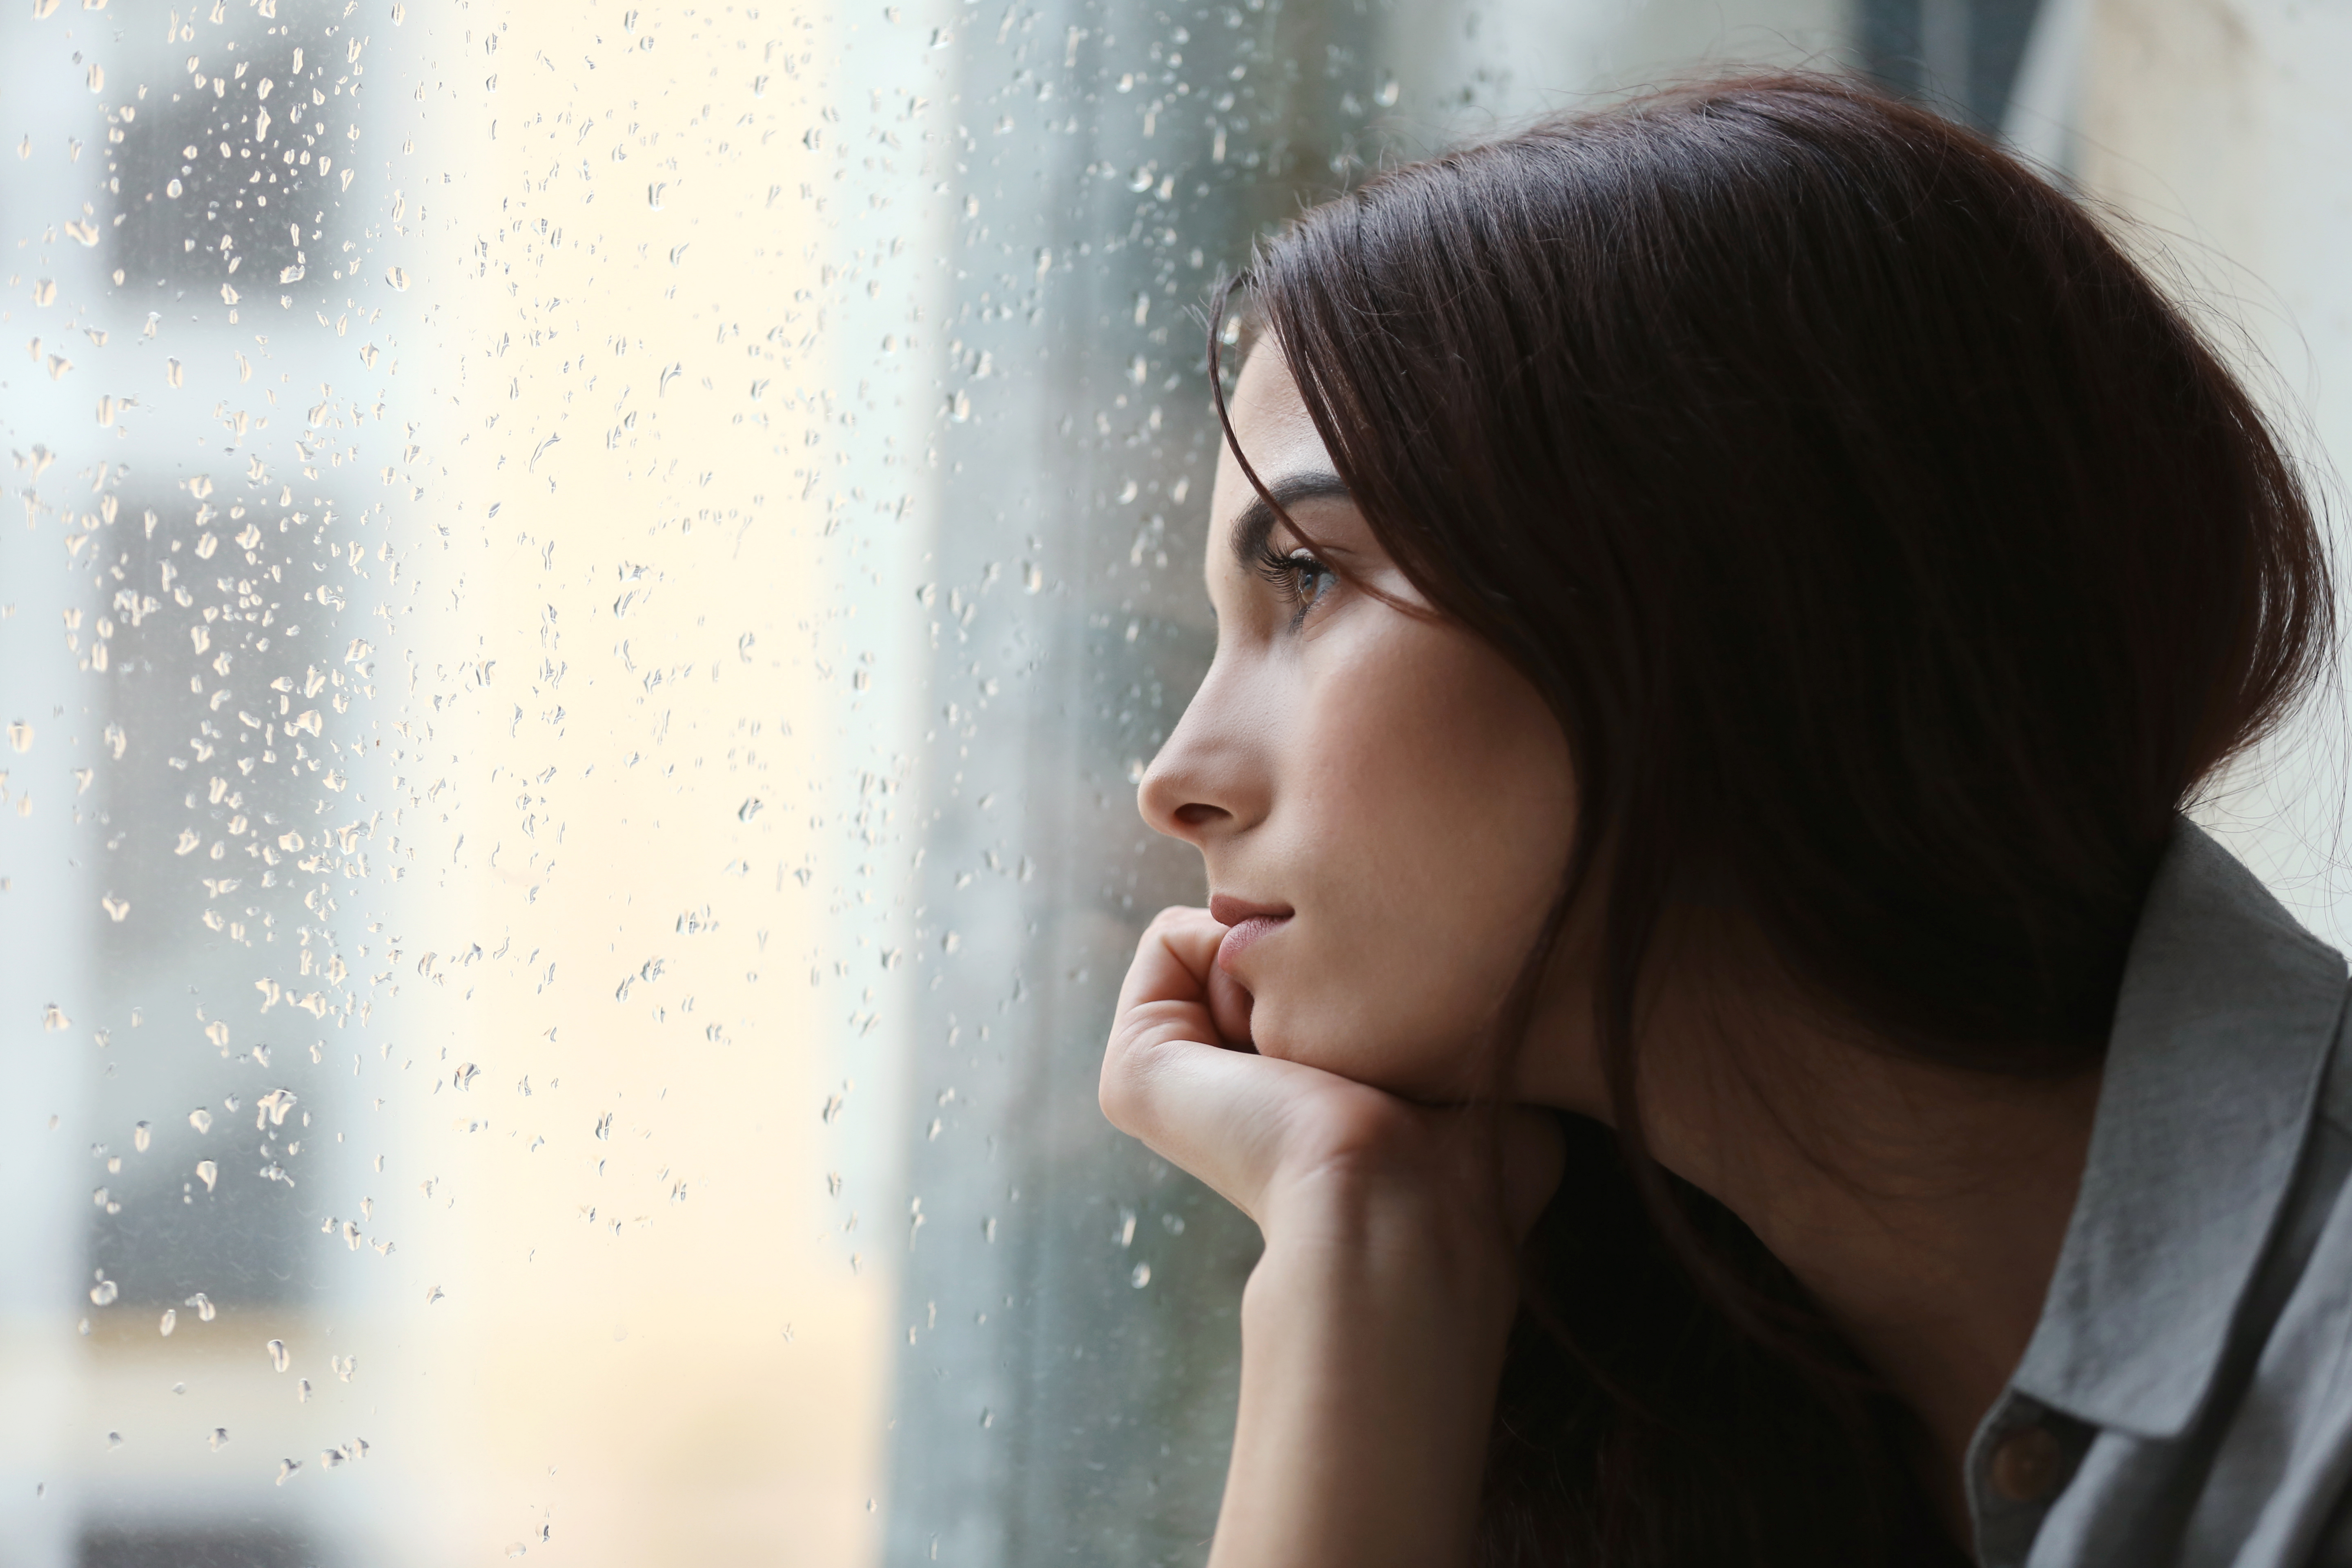 A woman looking out a window | Source: Shutterstock